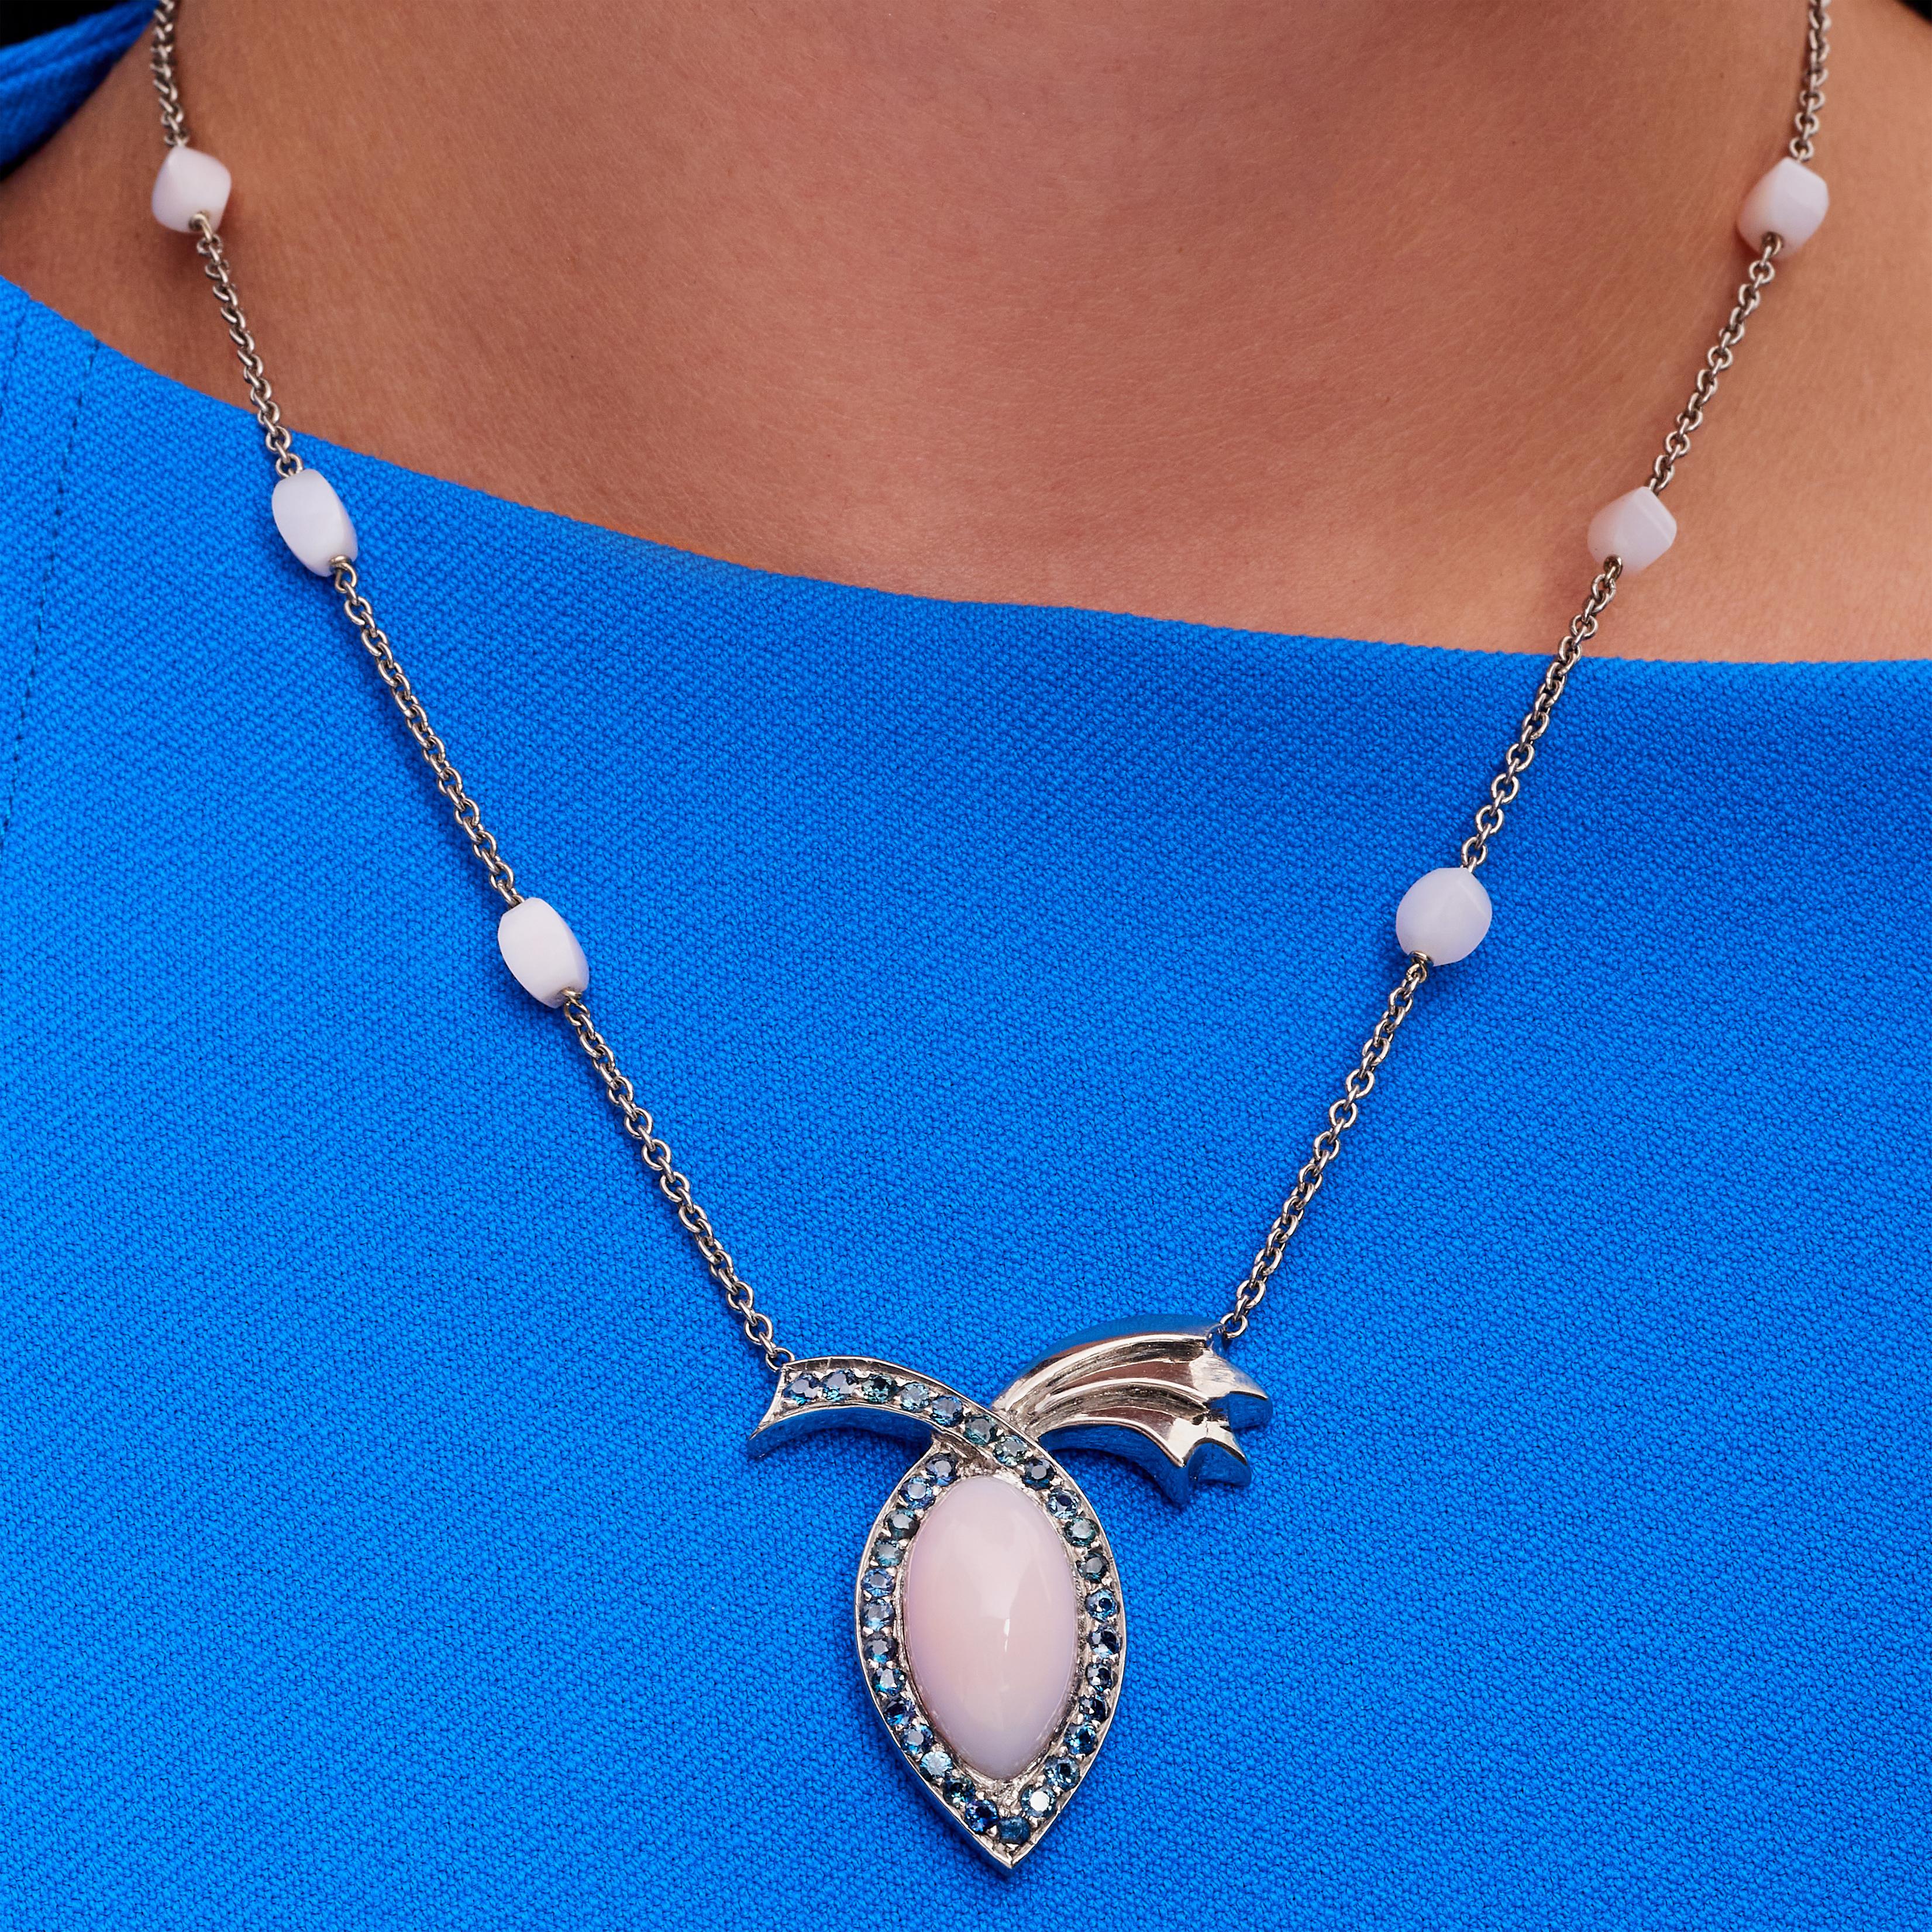 11.89 Carat Peruvian Pink Opal Blue Sapphire Pendant Necklace, In Stock.

This pendant necklace features a high dome marquise cut pink opal that is 11.898 carats. It is surrounded by round brilliant-cut blue sapphires that have a 2.53-carat total